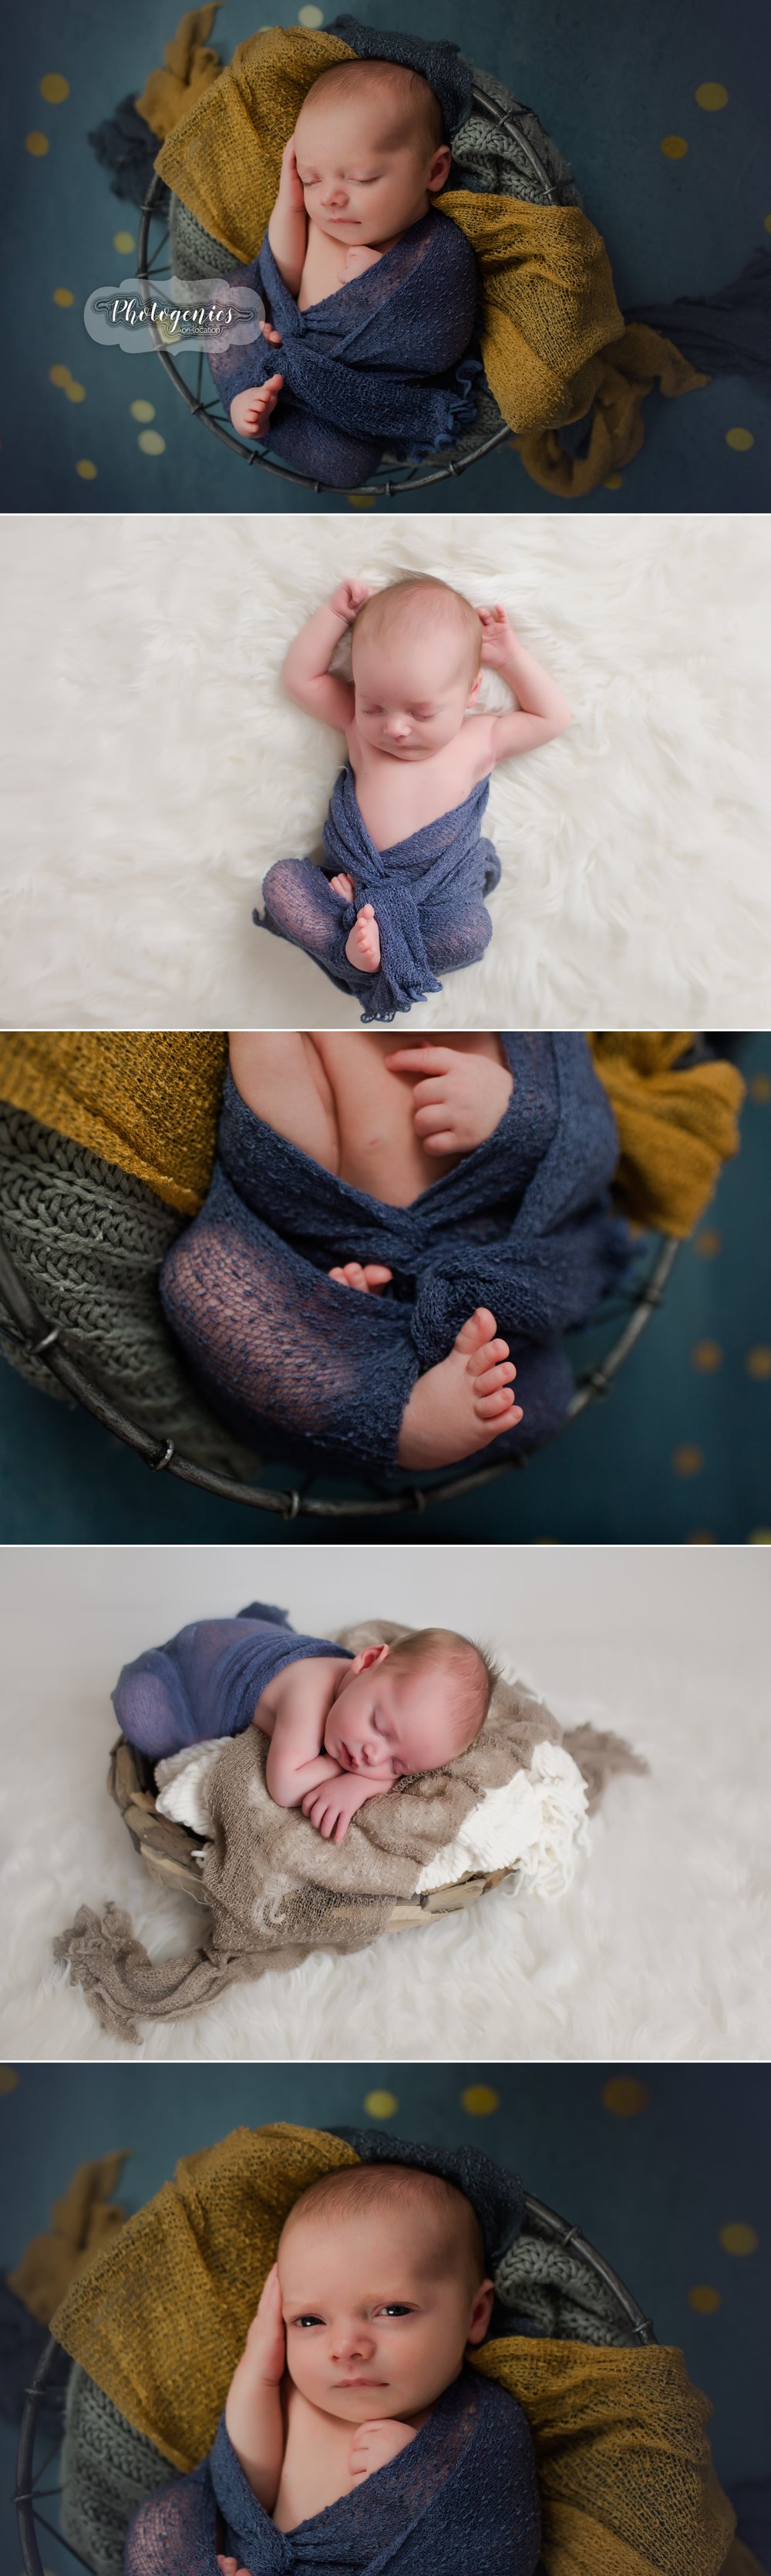  newborn_boy_photography_siblings_poses_ideas_hats_props_little_brother 2 